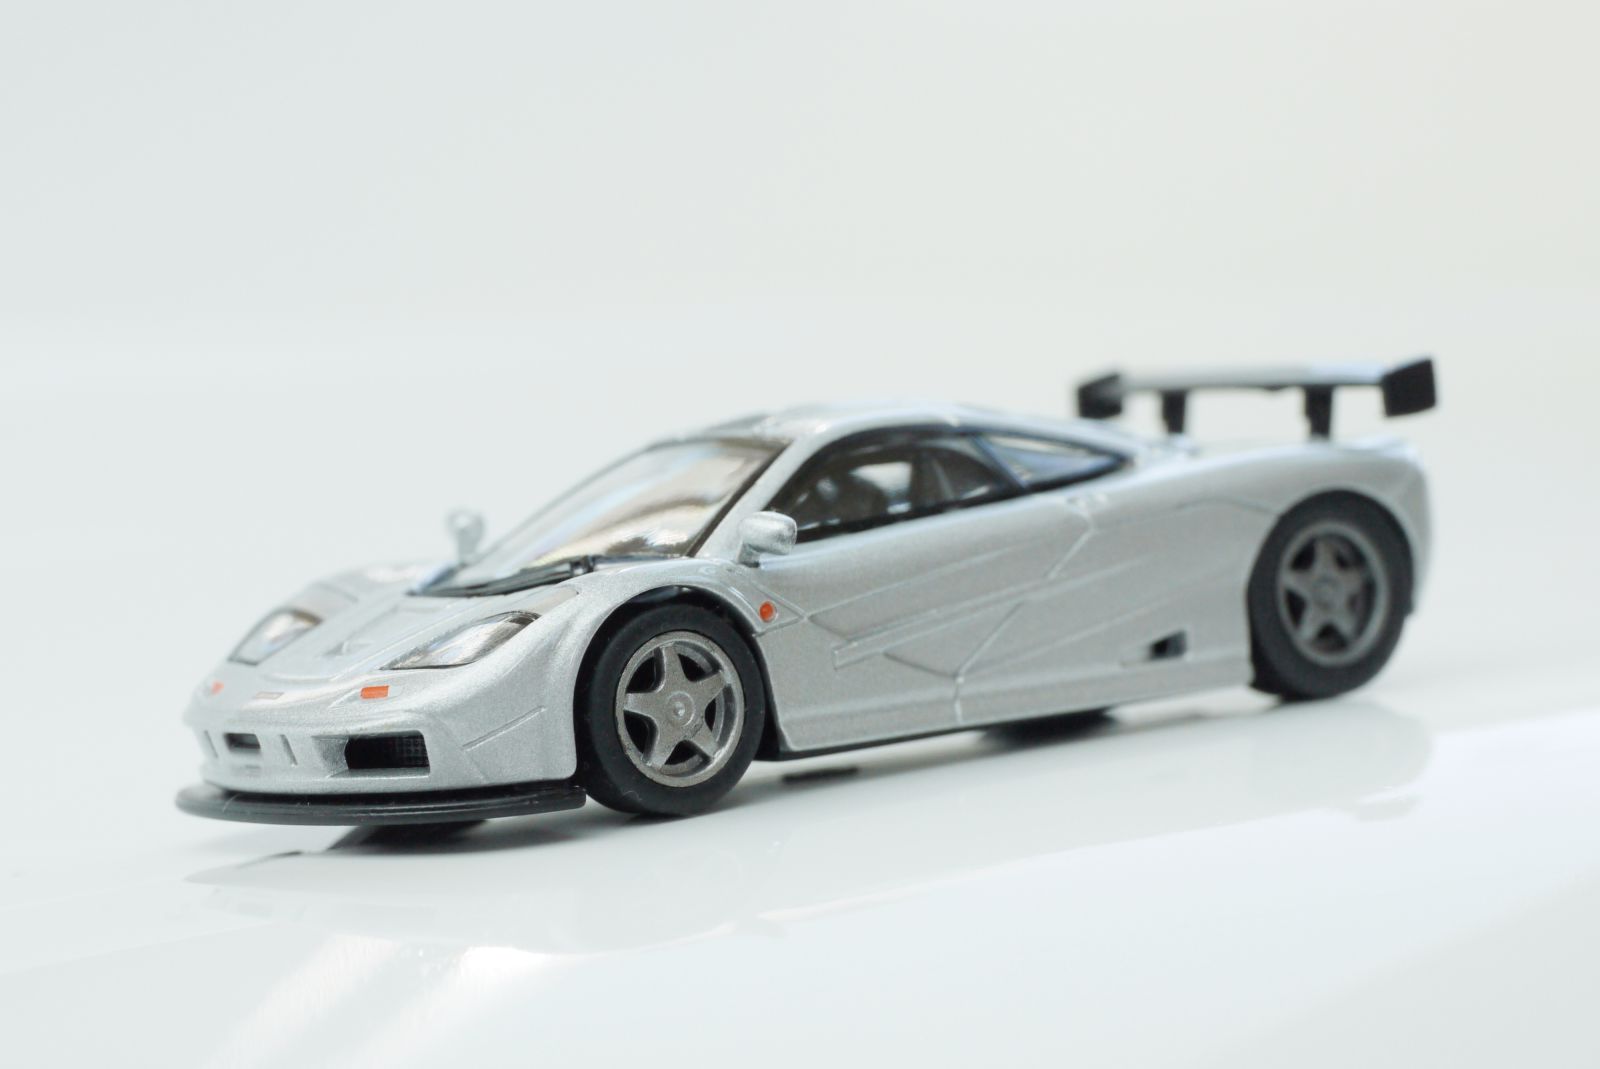 Illustration for article titled Kyosho British Sports Car collection 1/64 #77 - Project Speeding Kiwi #2 - 1995 McLaren F1 GTR